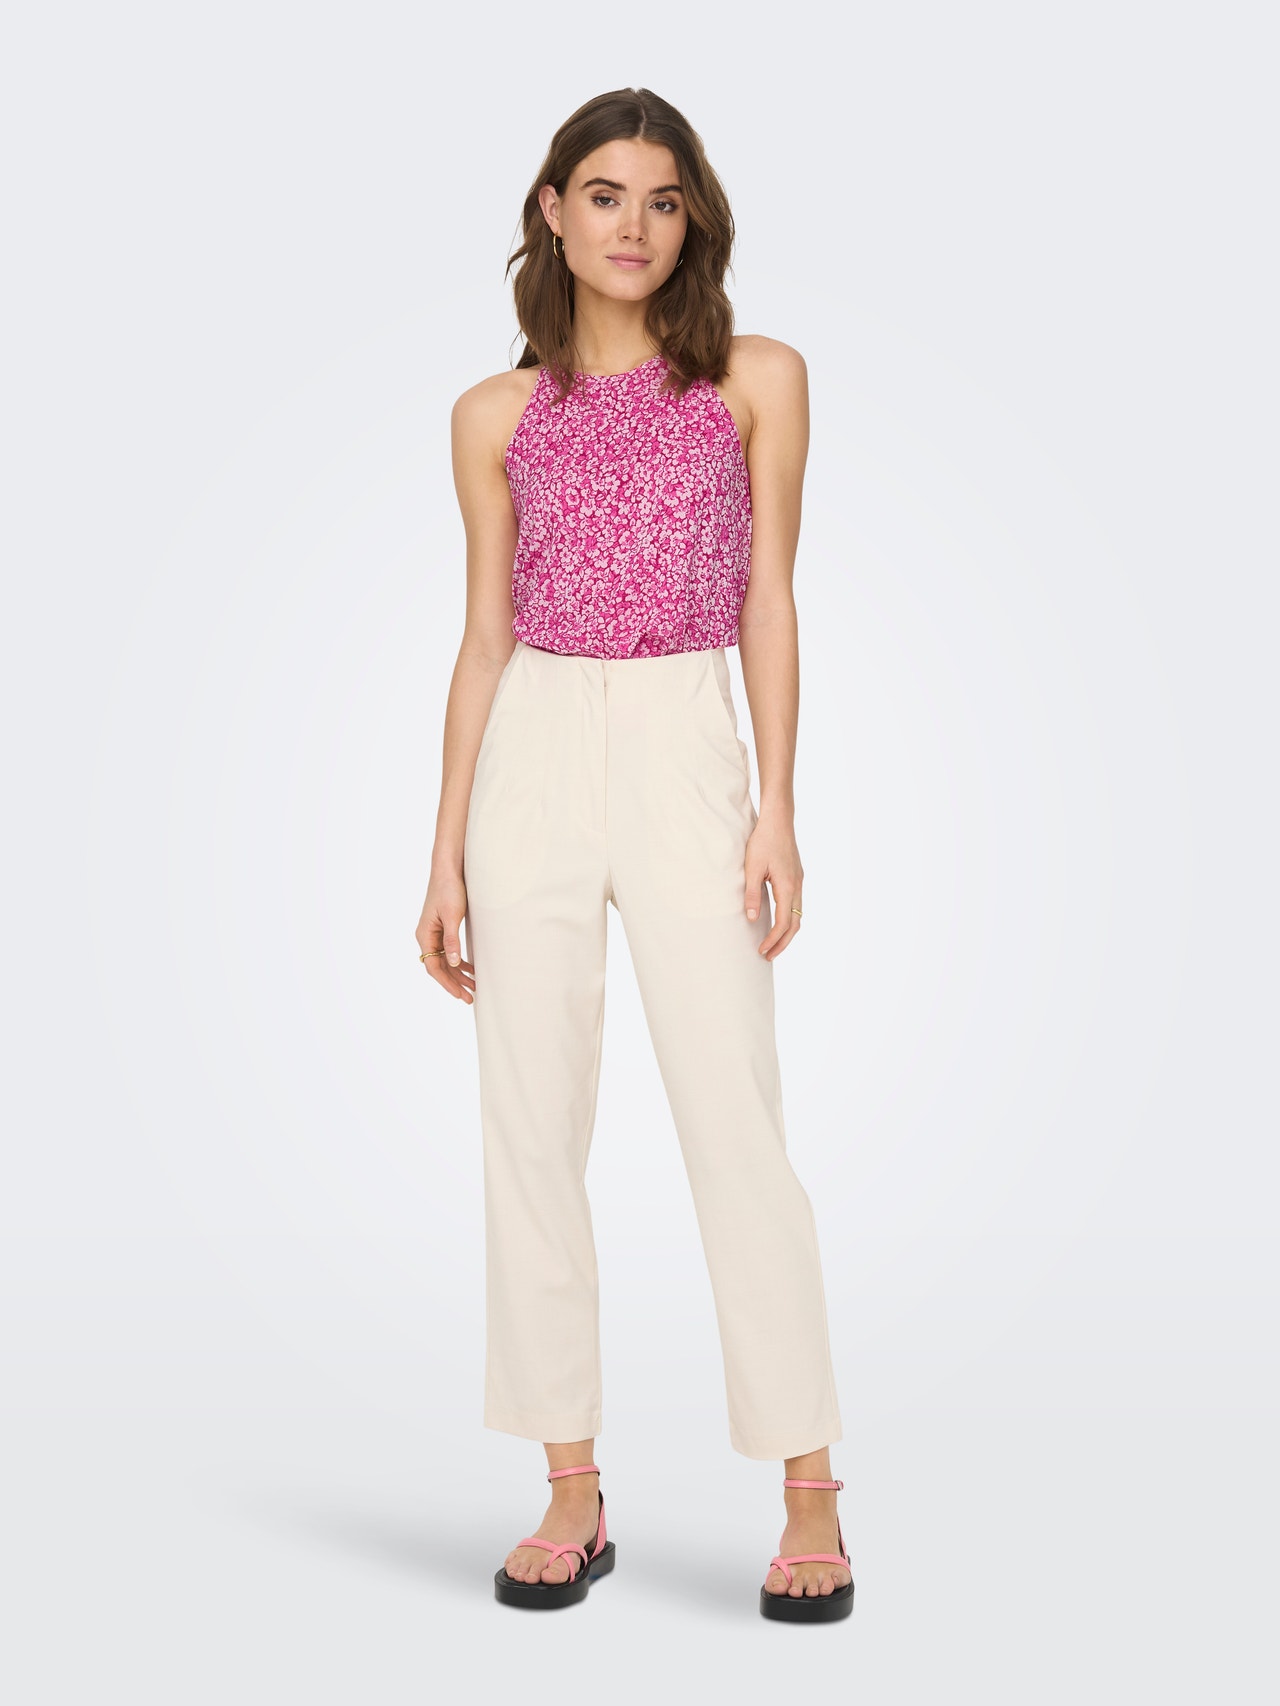 ONLY Dos nu Top -Very Berry - 15235763